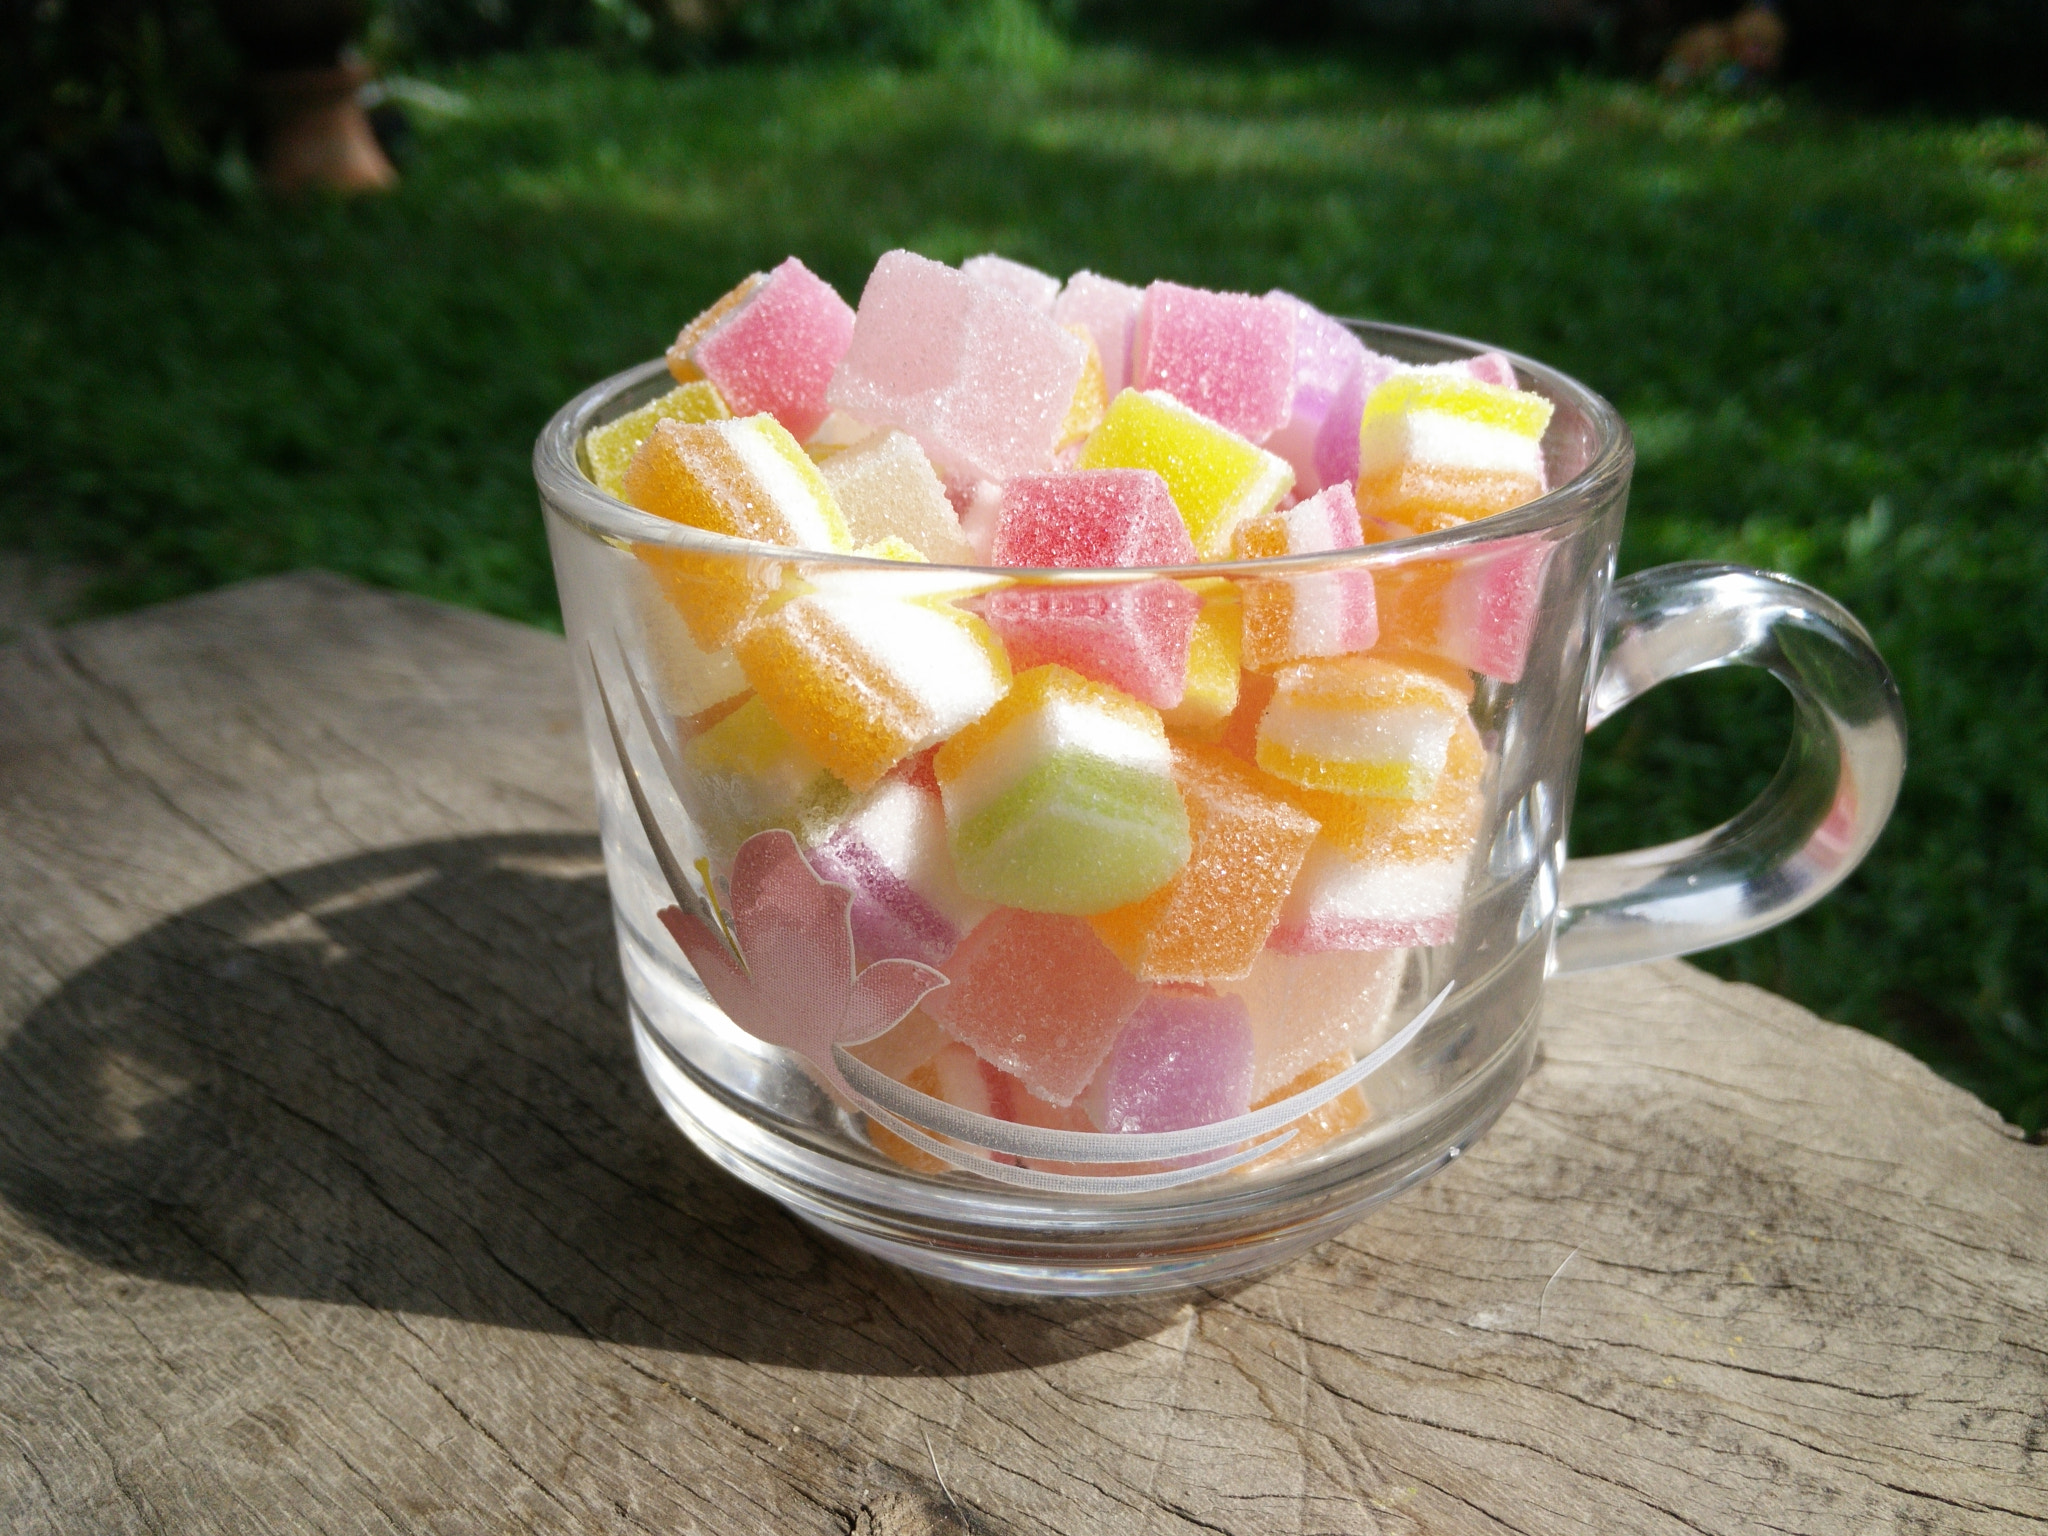 OPPO Find7 sample photo. Jelly sweet candy yummy photography